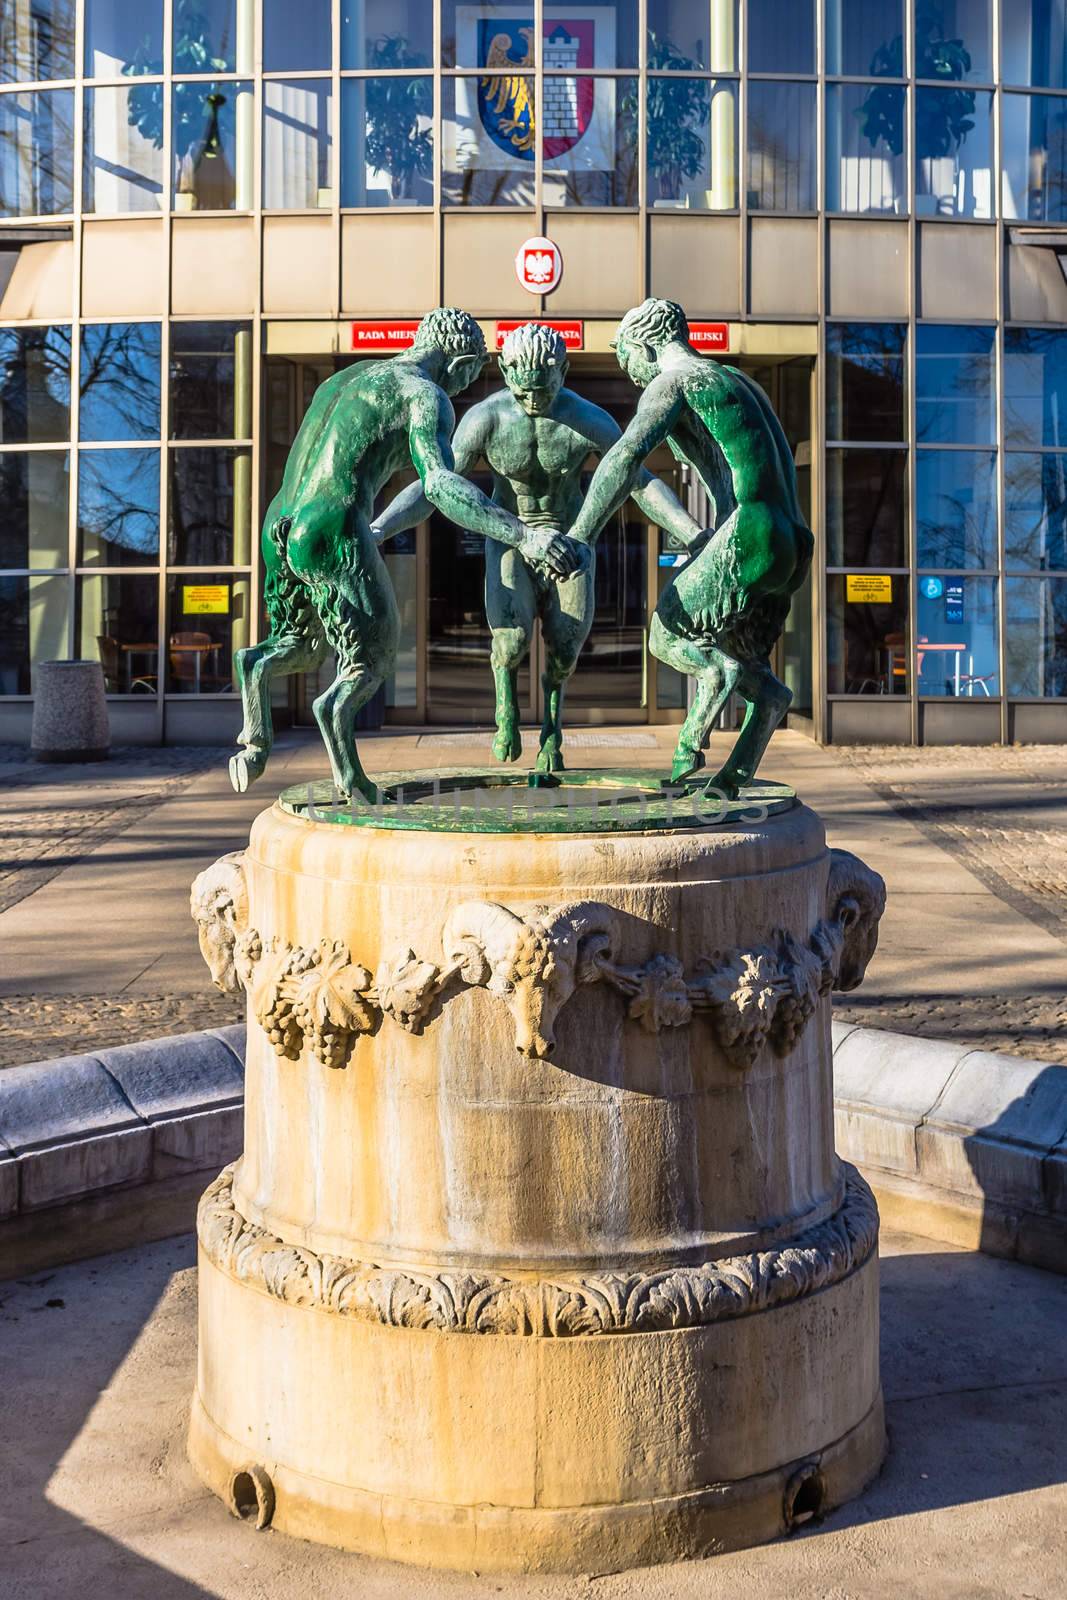 Sculpture in front of the city hall in Gliwice by pawel_szczepanski